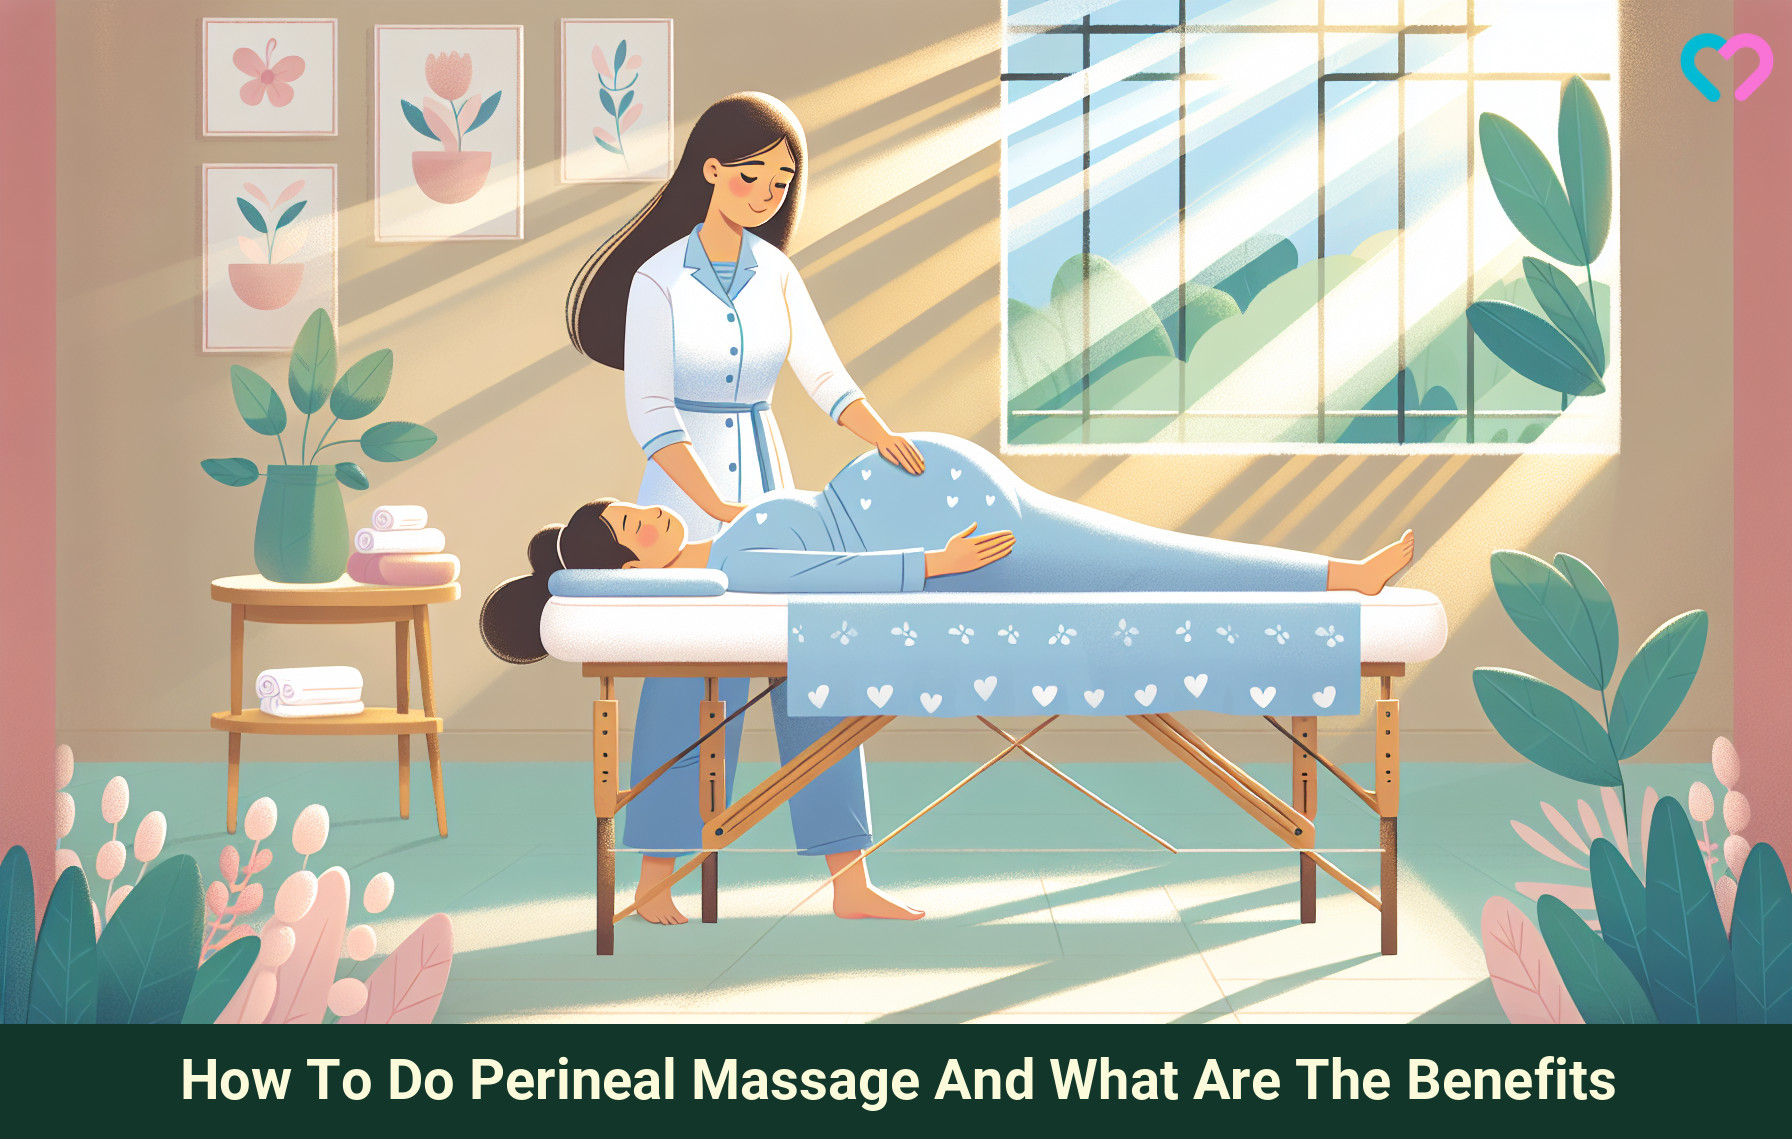 How To Do Perineal Massage And What Are The Benefits_illustration